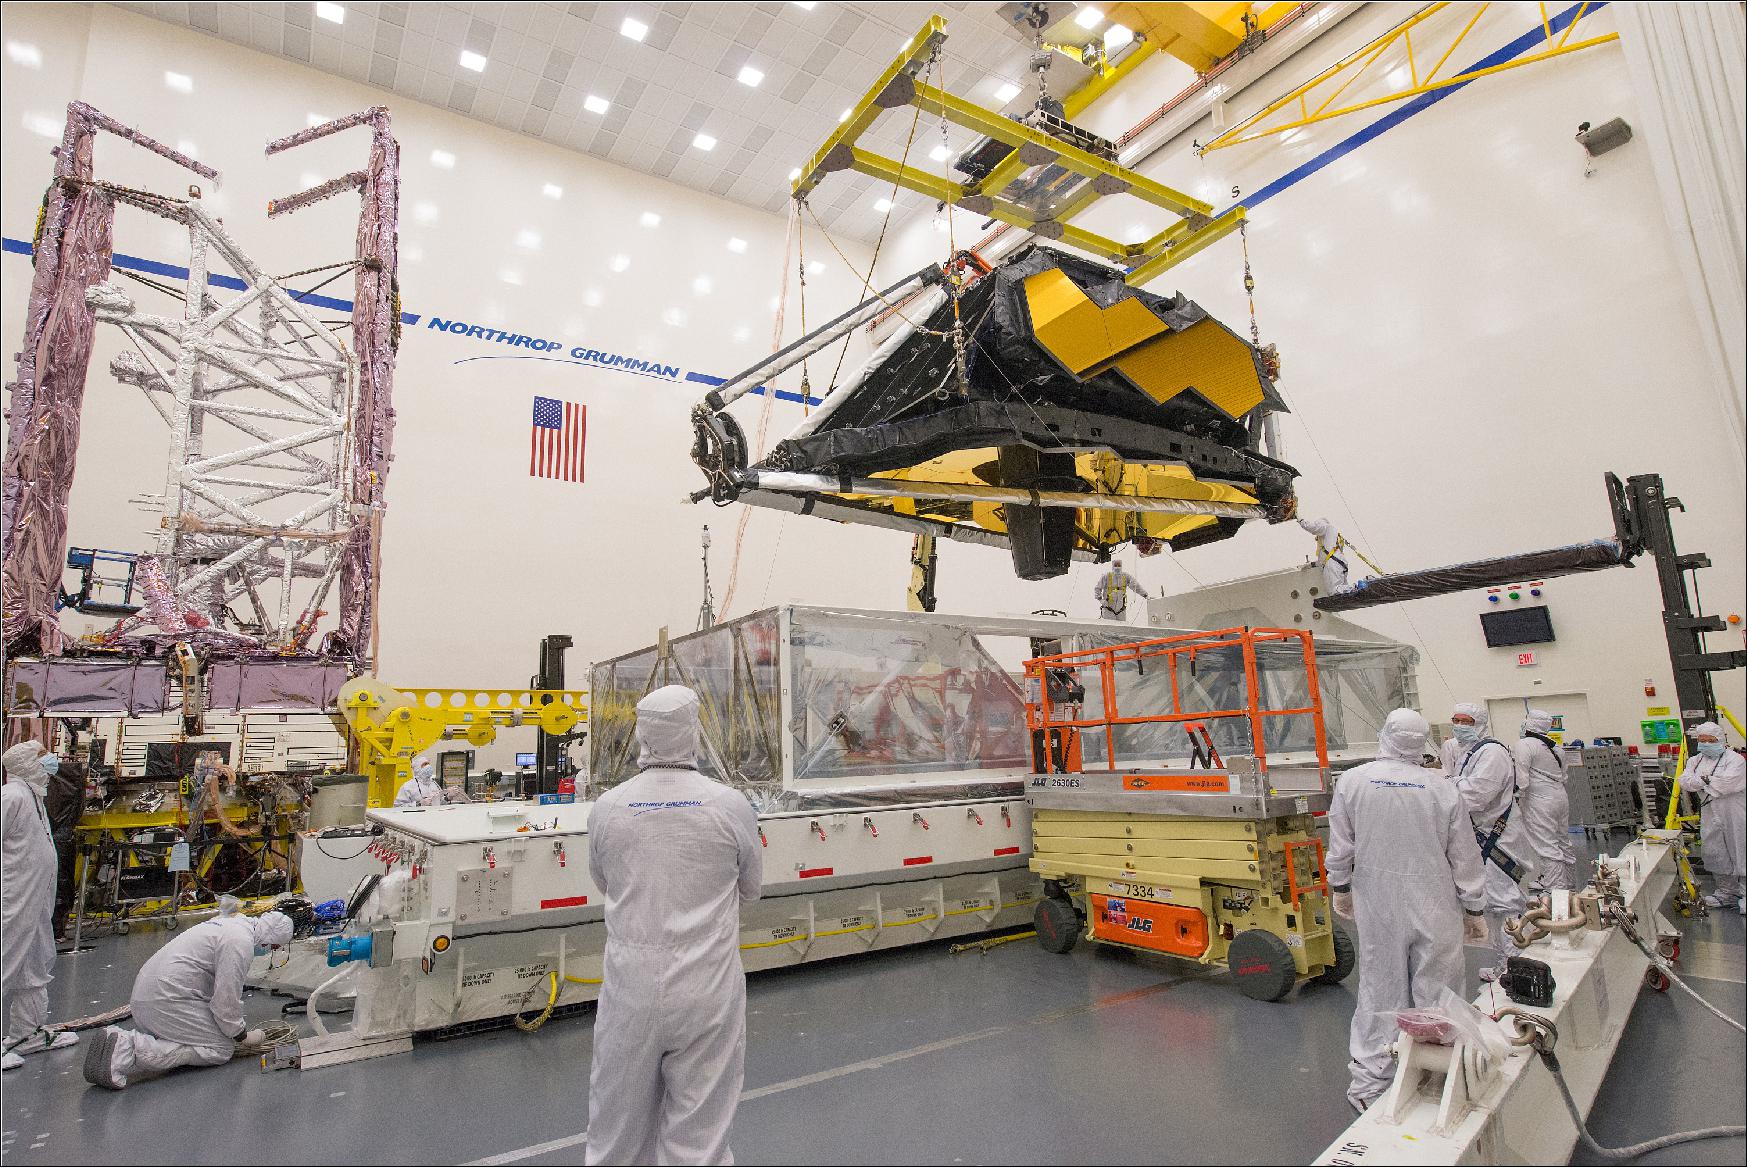 Figure 41: With all flight components under one roof, technicians and engineers work to prepare the two halves of the James Webb Space Telescope for continued testing and eventual assembly in 2019 (image credit: Northrop Grumman)